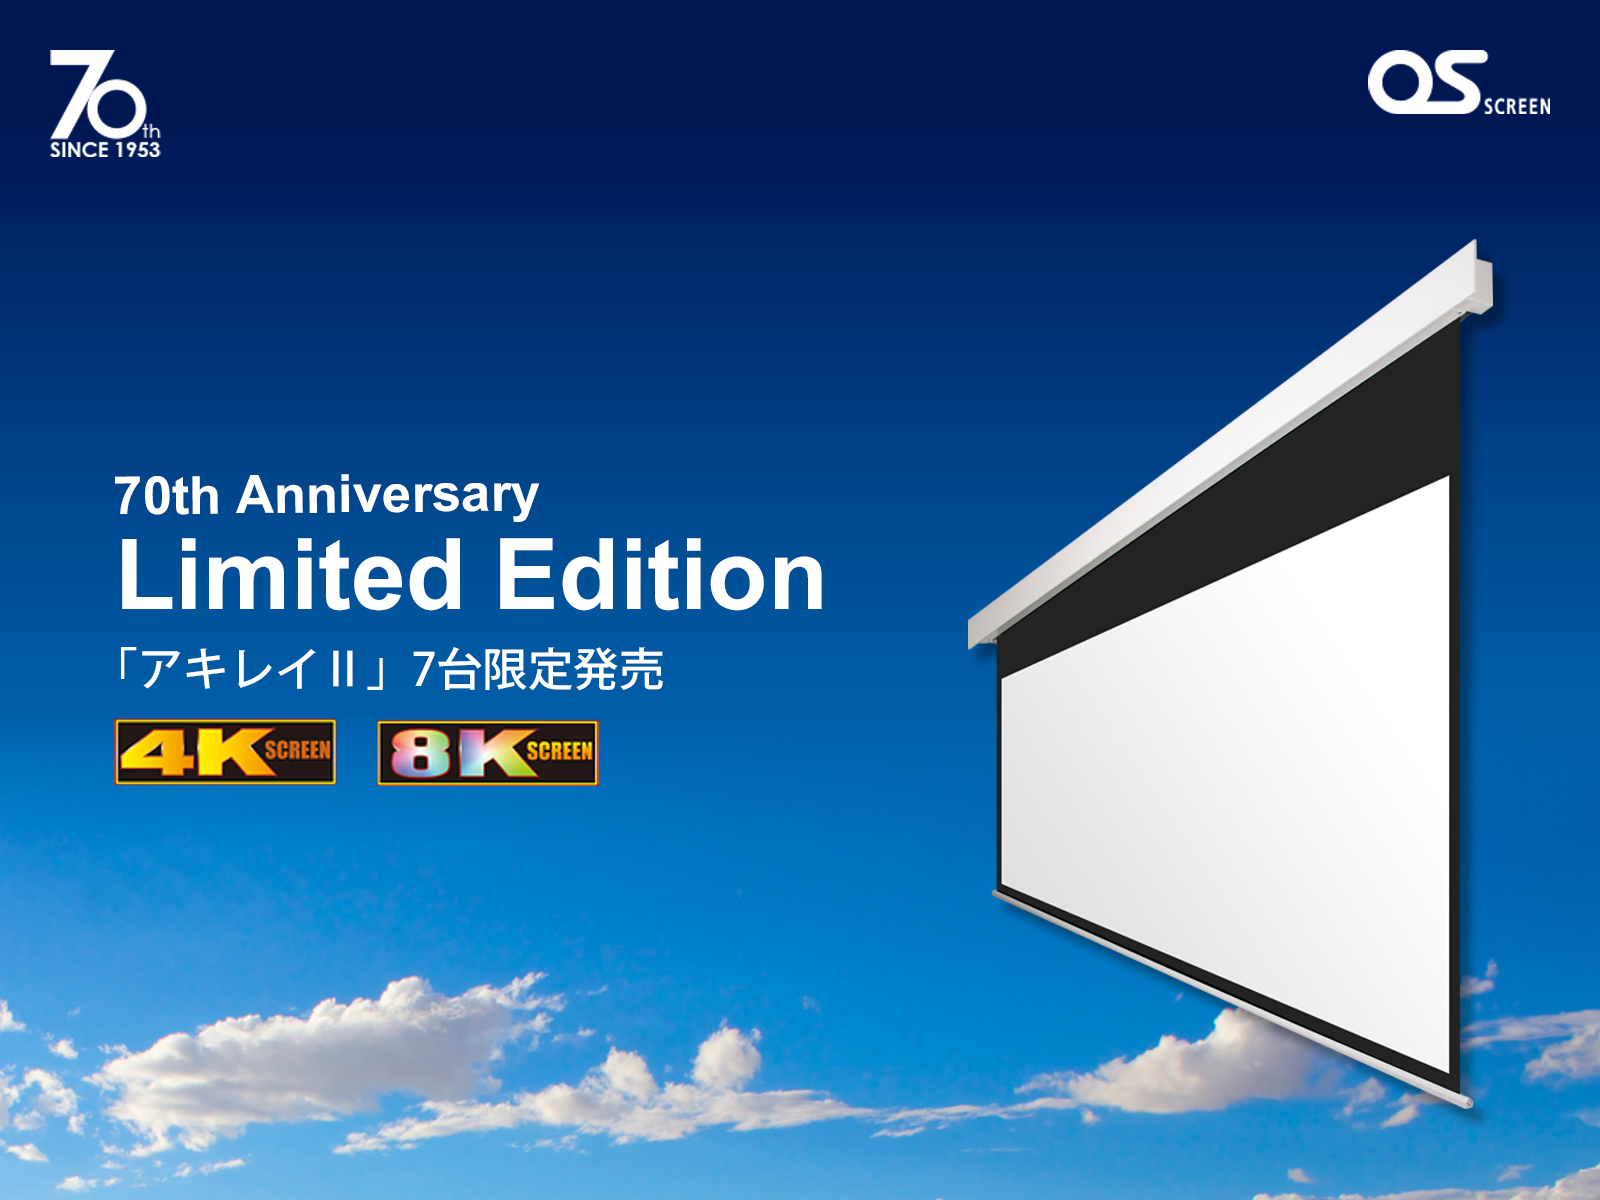 OS Group 70th Anniversary Limited Edition AKIREI II electric screen on sale for a limited time.